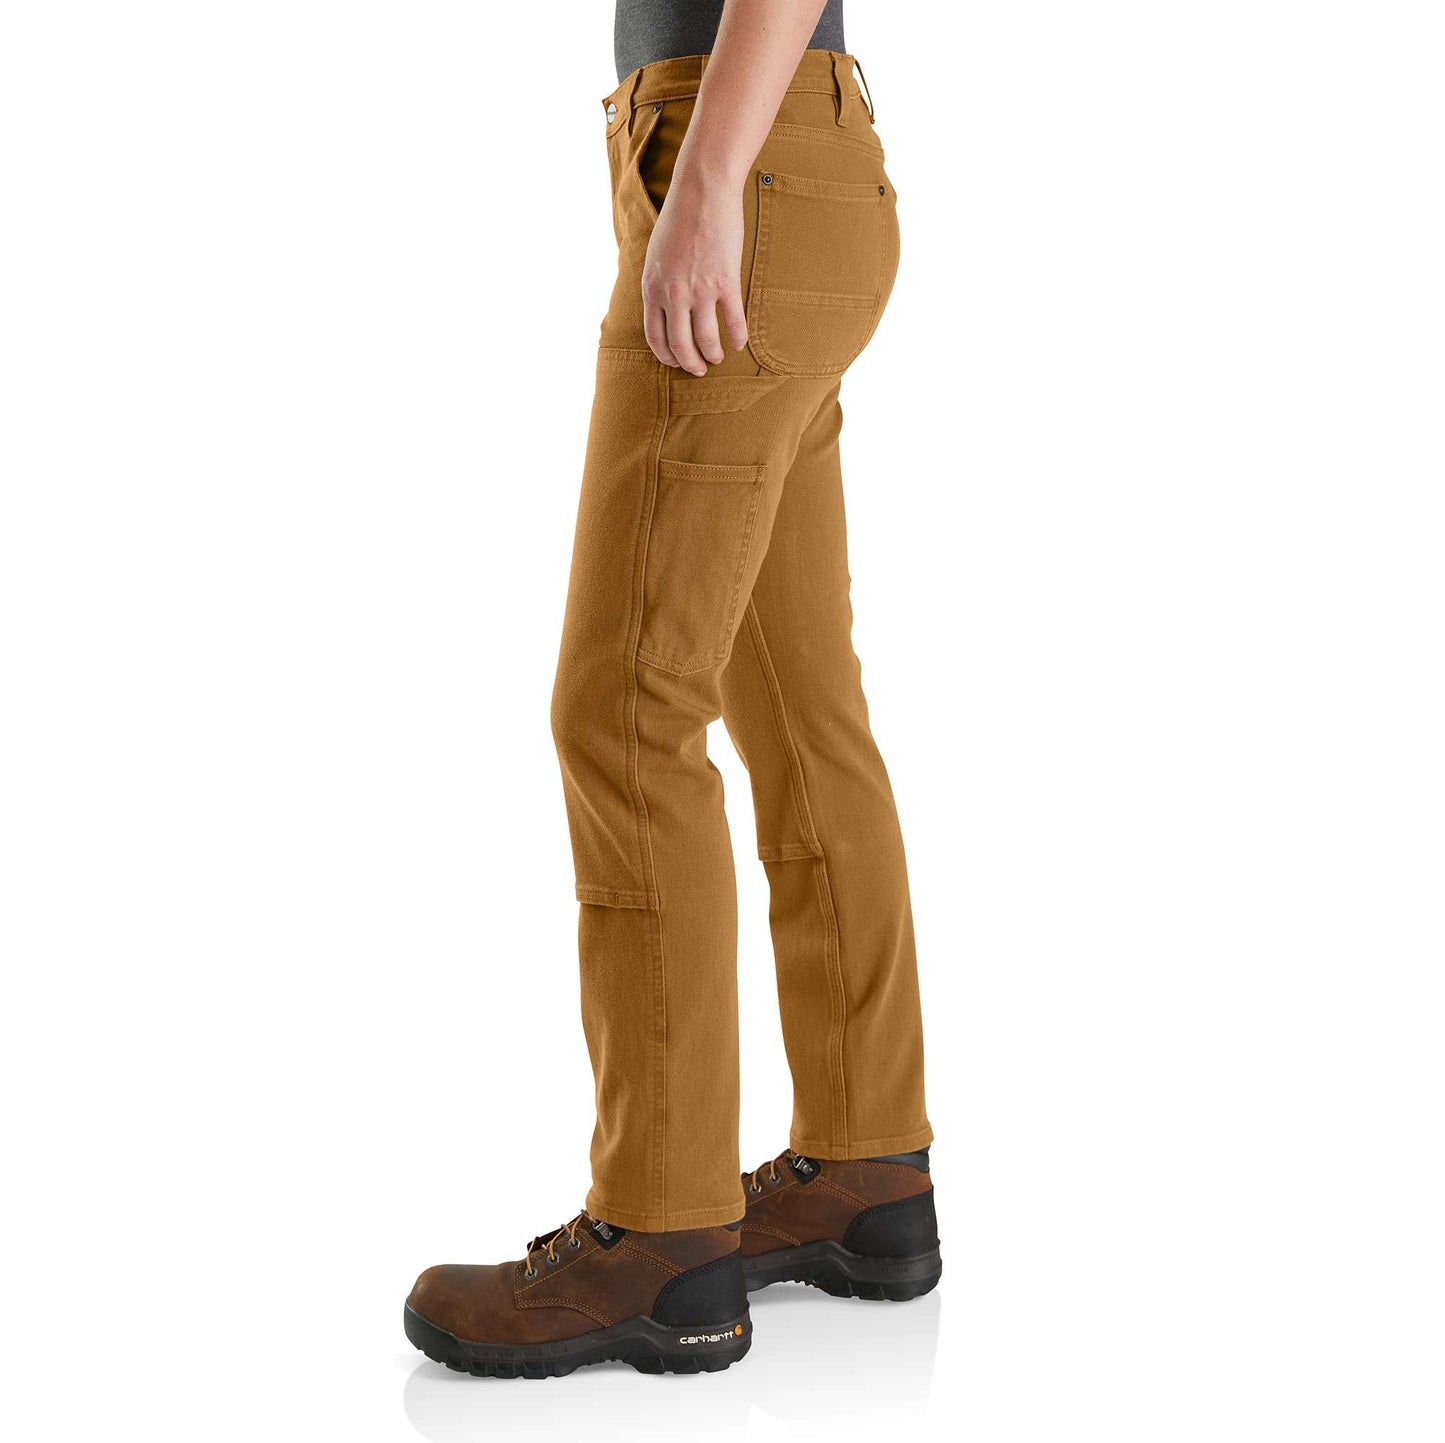 Carhartt Women's Relaxed Fit Double Front Canvas Work Pants - Carhartt Brown